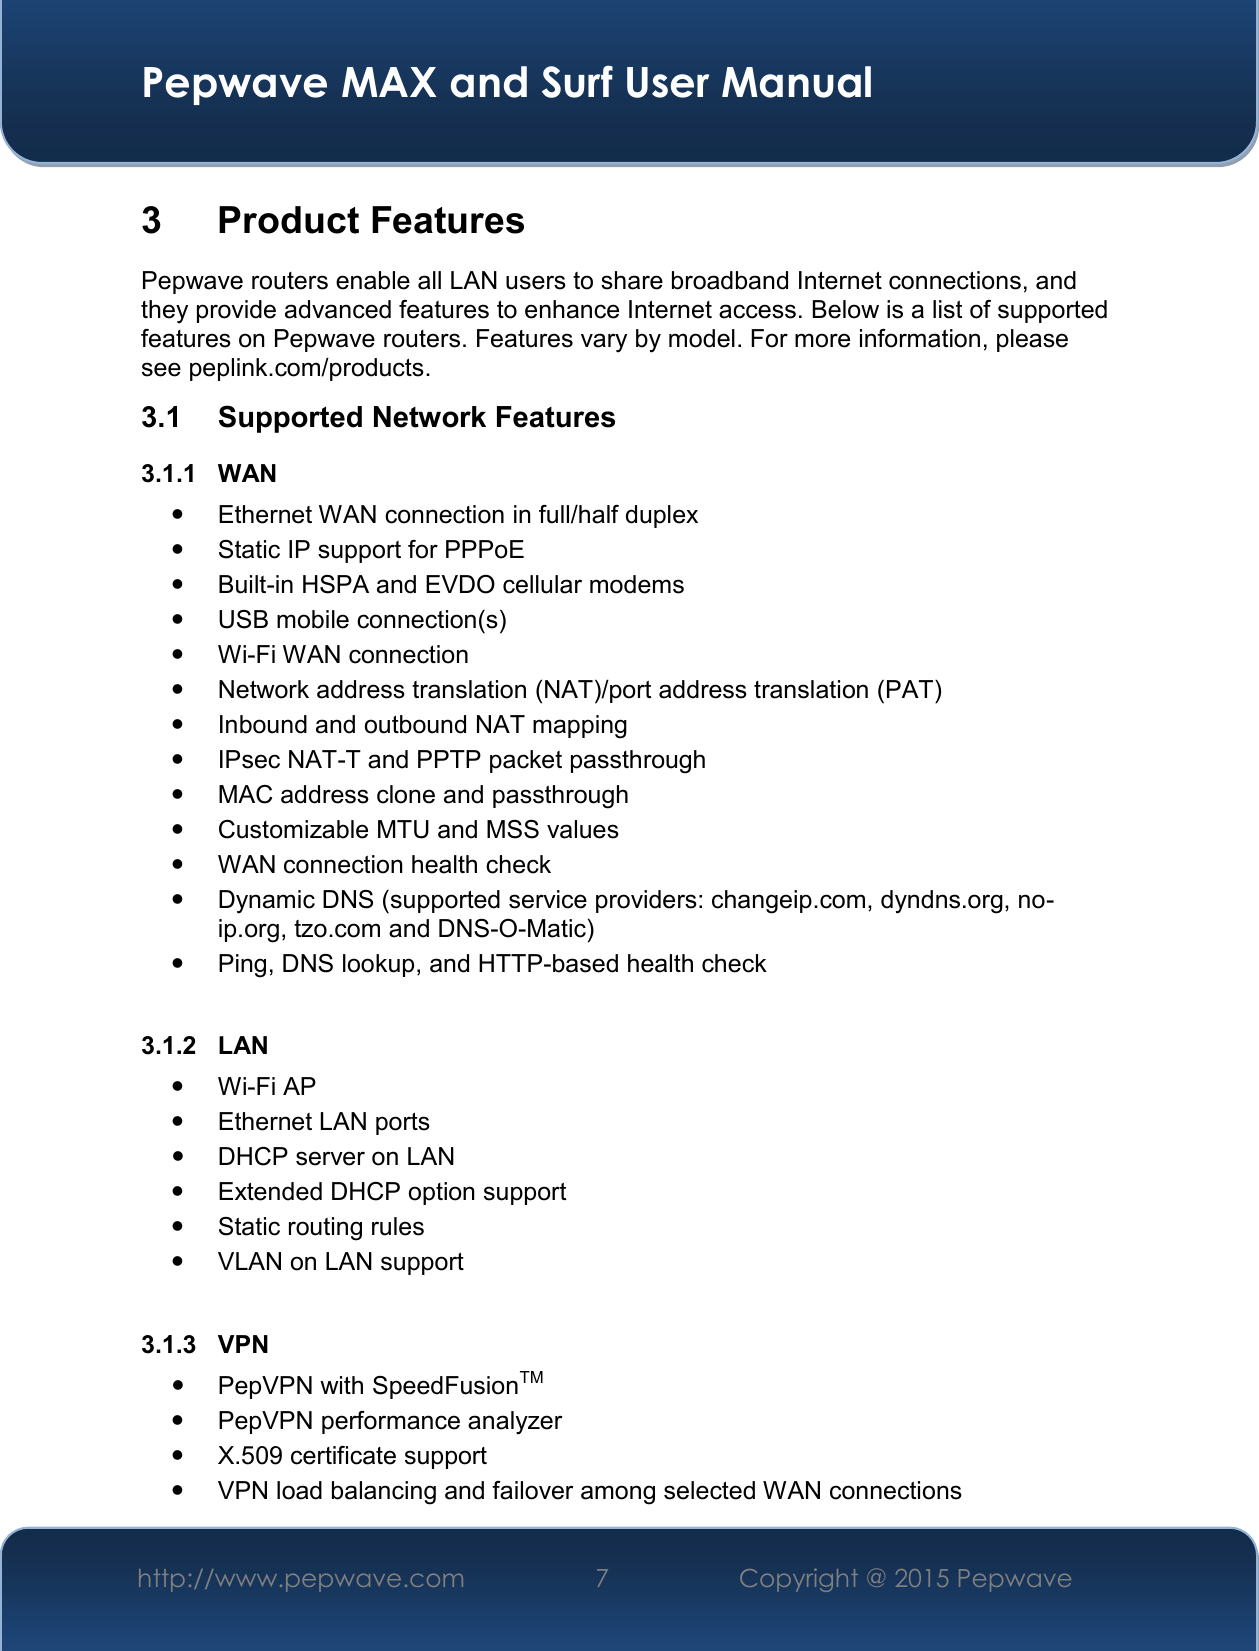  Pepwave MAX and Surf User Manual http://www.pepwave.com 7   Copyright @ 2015 Pepwave   3  Product Features Pepwave routers enable all LAN users to share broadband Internet connections, and they provide advanced features to enhance Internet access. Below is a list of supported features on Pepwave routers. Features vary by model. For more information, please see peplink.com/products. 3.1  Supported Network Features 3.1.1  WAN   Ethernet WAN connection in full/half duplex   Static IP support for PPPoE   Built-in HSPA and EVDO cellular modems   USB mobile connection(s)   Wi-Fi WAN connection   Network address translation (NAT)/port address translation (PAT)   Inbound and outbound NAT mapping   IPsec NAT-T and PPTP packet passthrough   MAC address clone and passthrough   Customizable MTU and MSS values   WAN connection health check   Dynamic DNS (supported service providers: changeip.com, dyndns.org, no-ip.org, tzo.com and DNS-O-Matic)   Ping, DNS lookup, and HTTP-based health check  3.1.2  LAN  Wi-Fi AP   Ethernet LAN ports   DHCP server on LAN   Extended DHCP option support   Static routing rules   VLAN on LAN support  3.1.3  VPN   PepVPN with SpeedFusionTM   PepVPN performance analyzer   X.509 certificate support    VPN load balancing and failover among selected WAN connections 